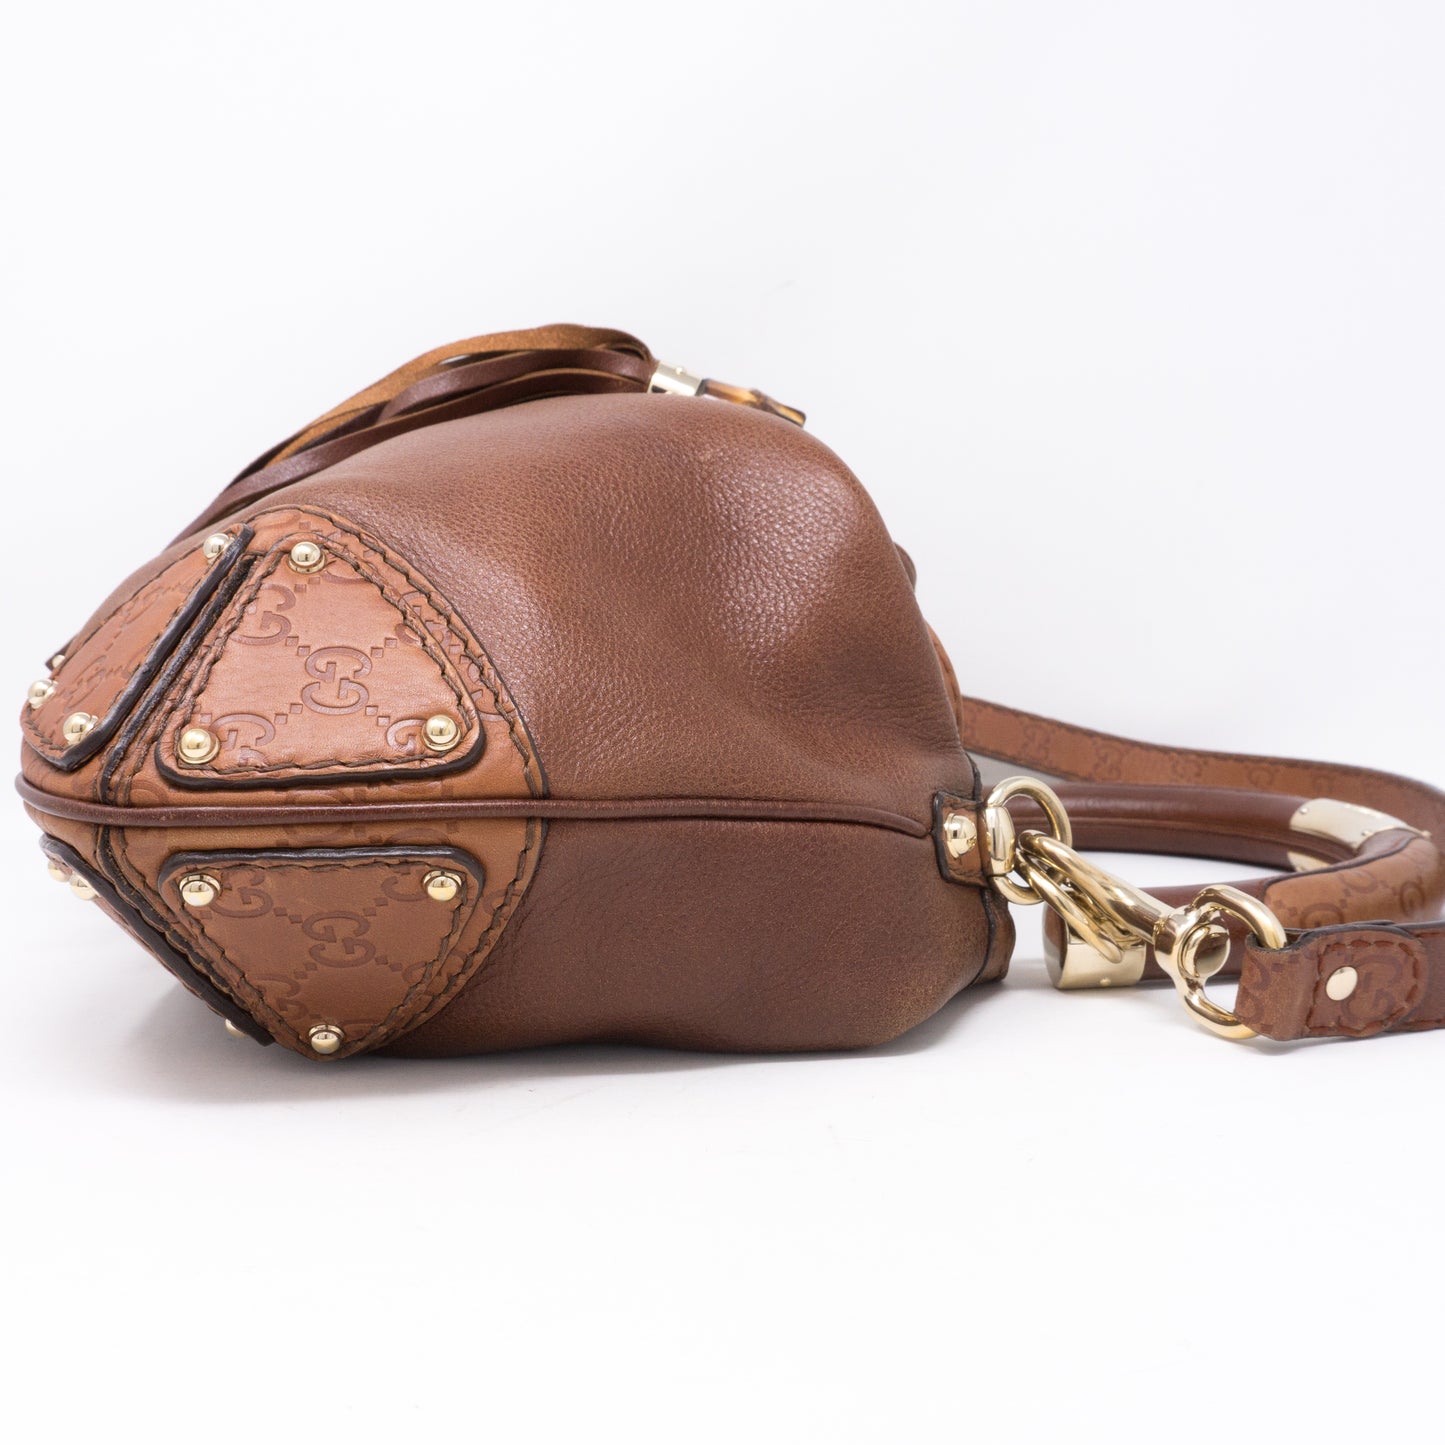 Indy Brown Leather Bag